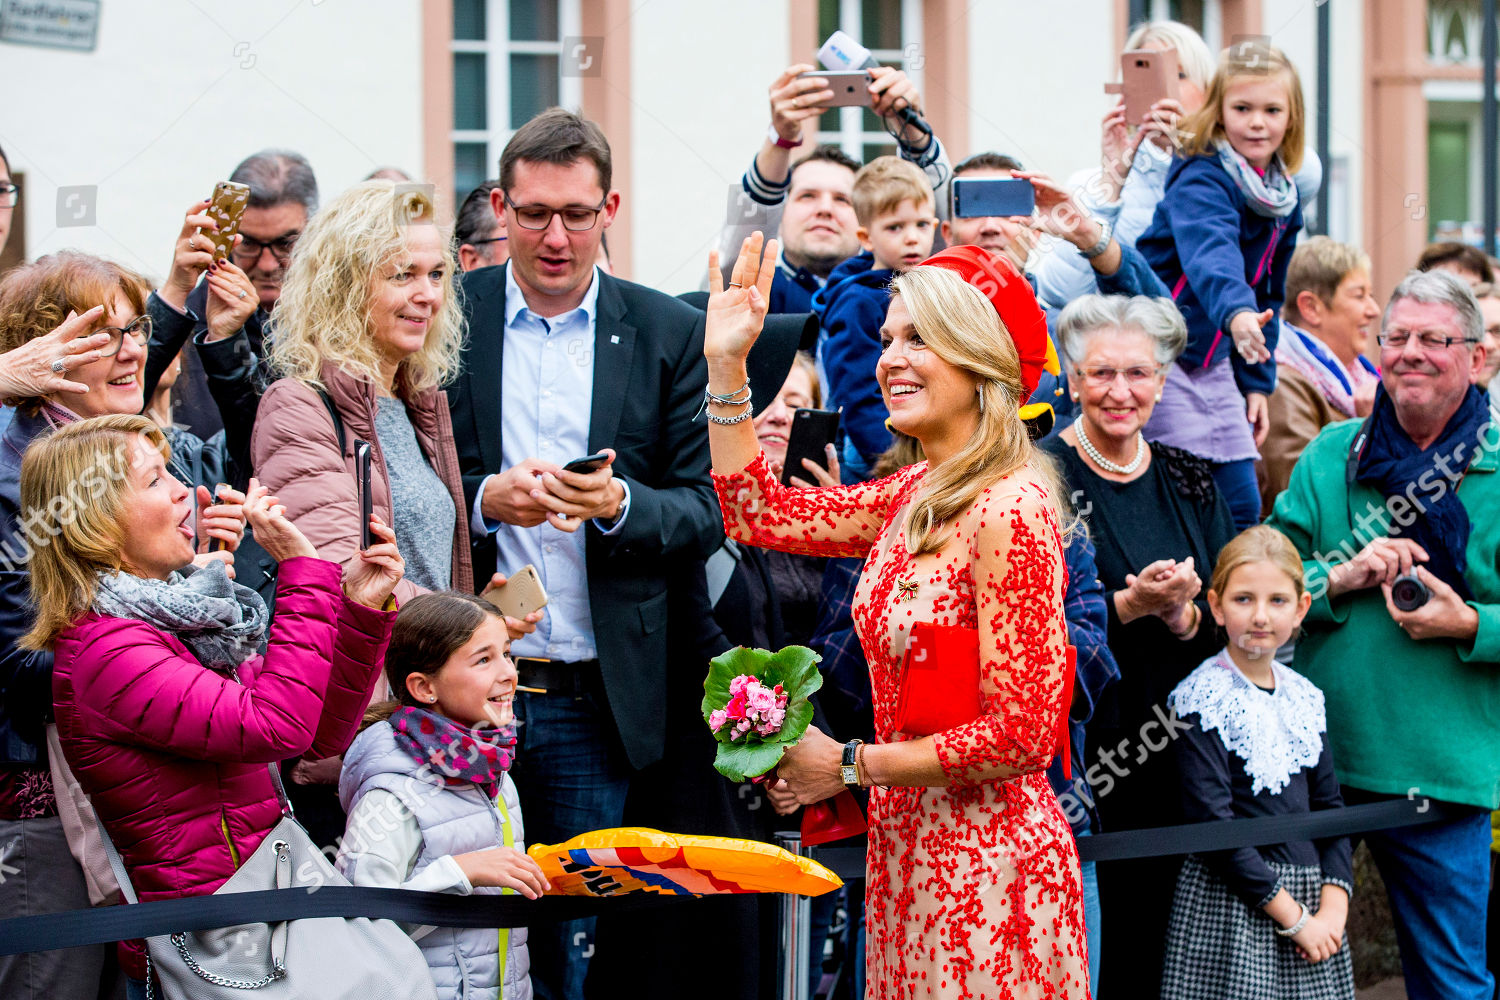 king-willem-alexander-and-queen-maxima-visit-to-germany-shutterstock-editorial-9922672v.jpg